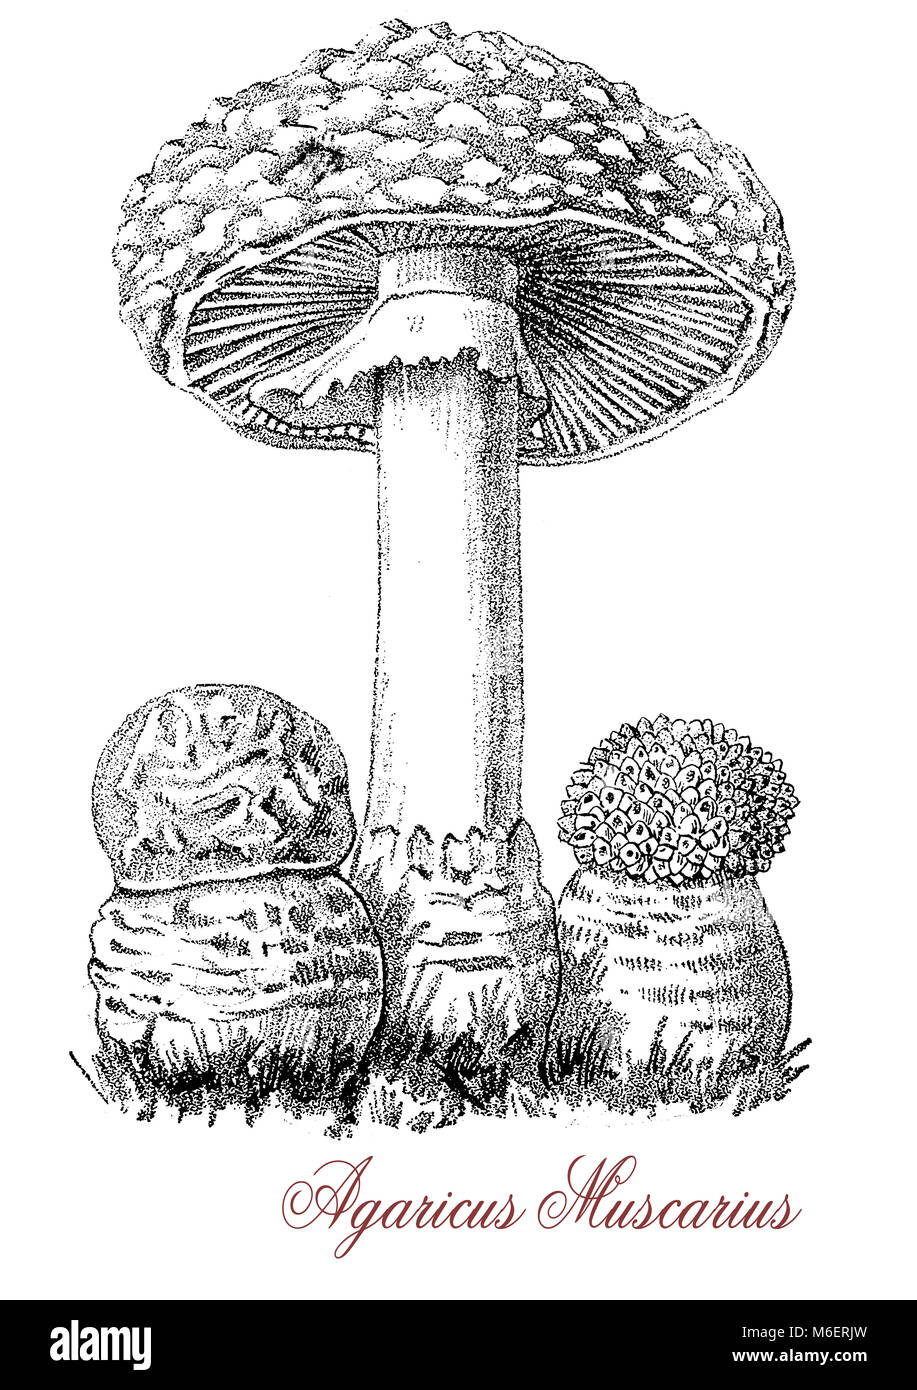 Vintage engraving of agaricus muscarius or amanita muscaria, fairy tale fungus with red cap and white spots,  poisonous and hallucinogenic Stock Photo